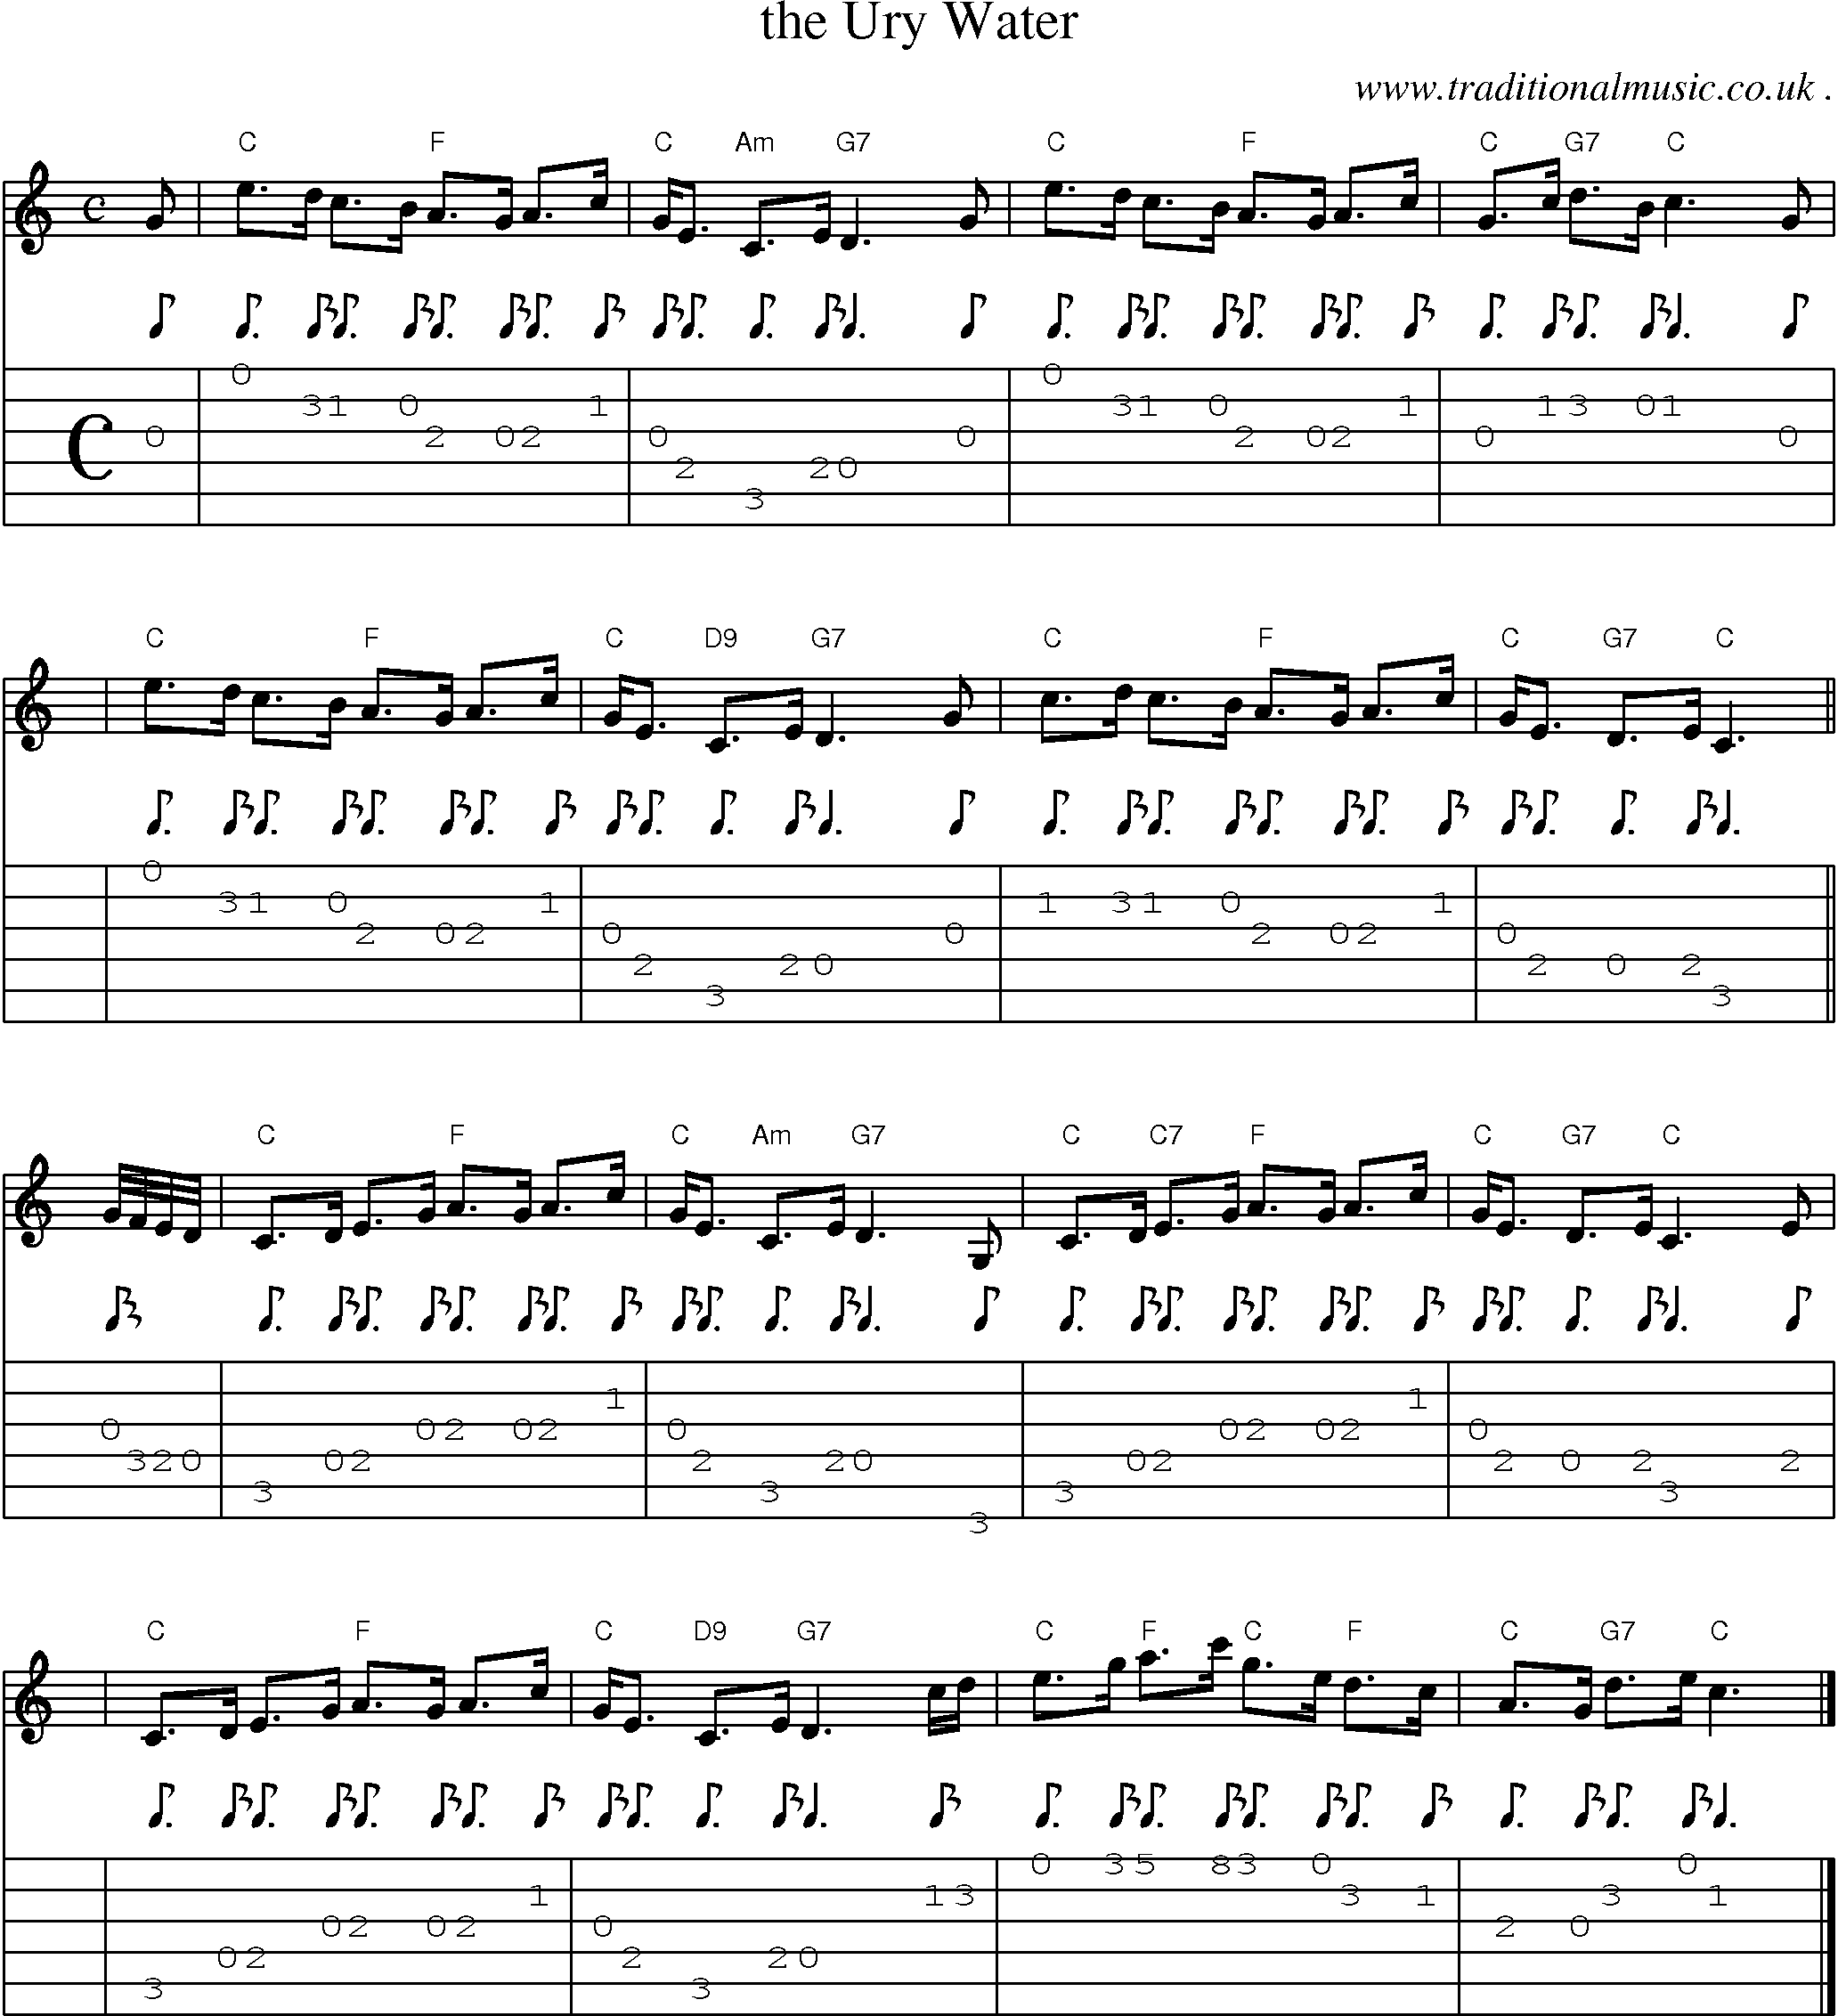 Sheet-music  score, Chords and Guitar Tabs for The Ury Water